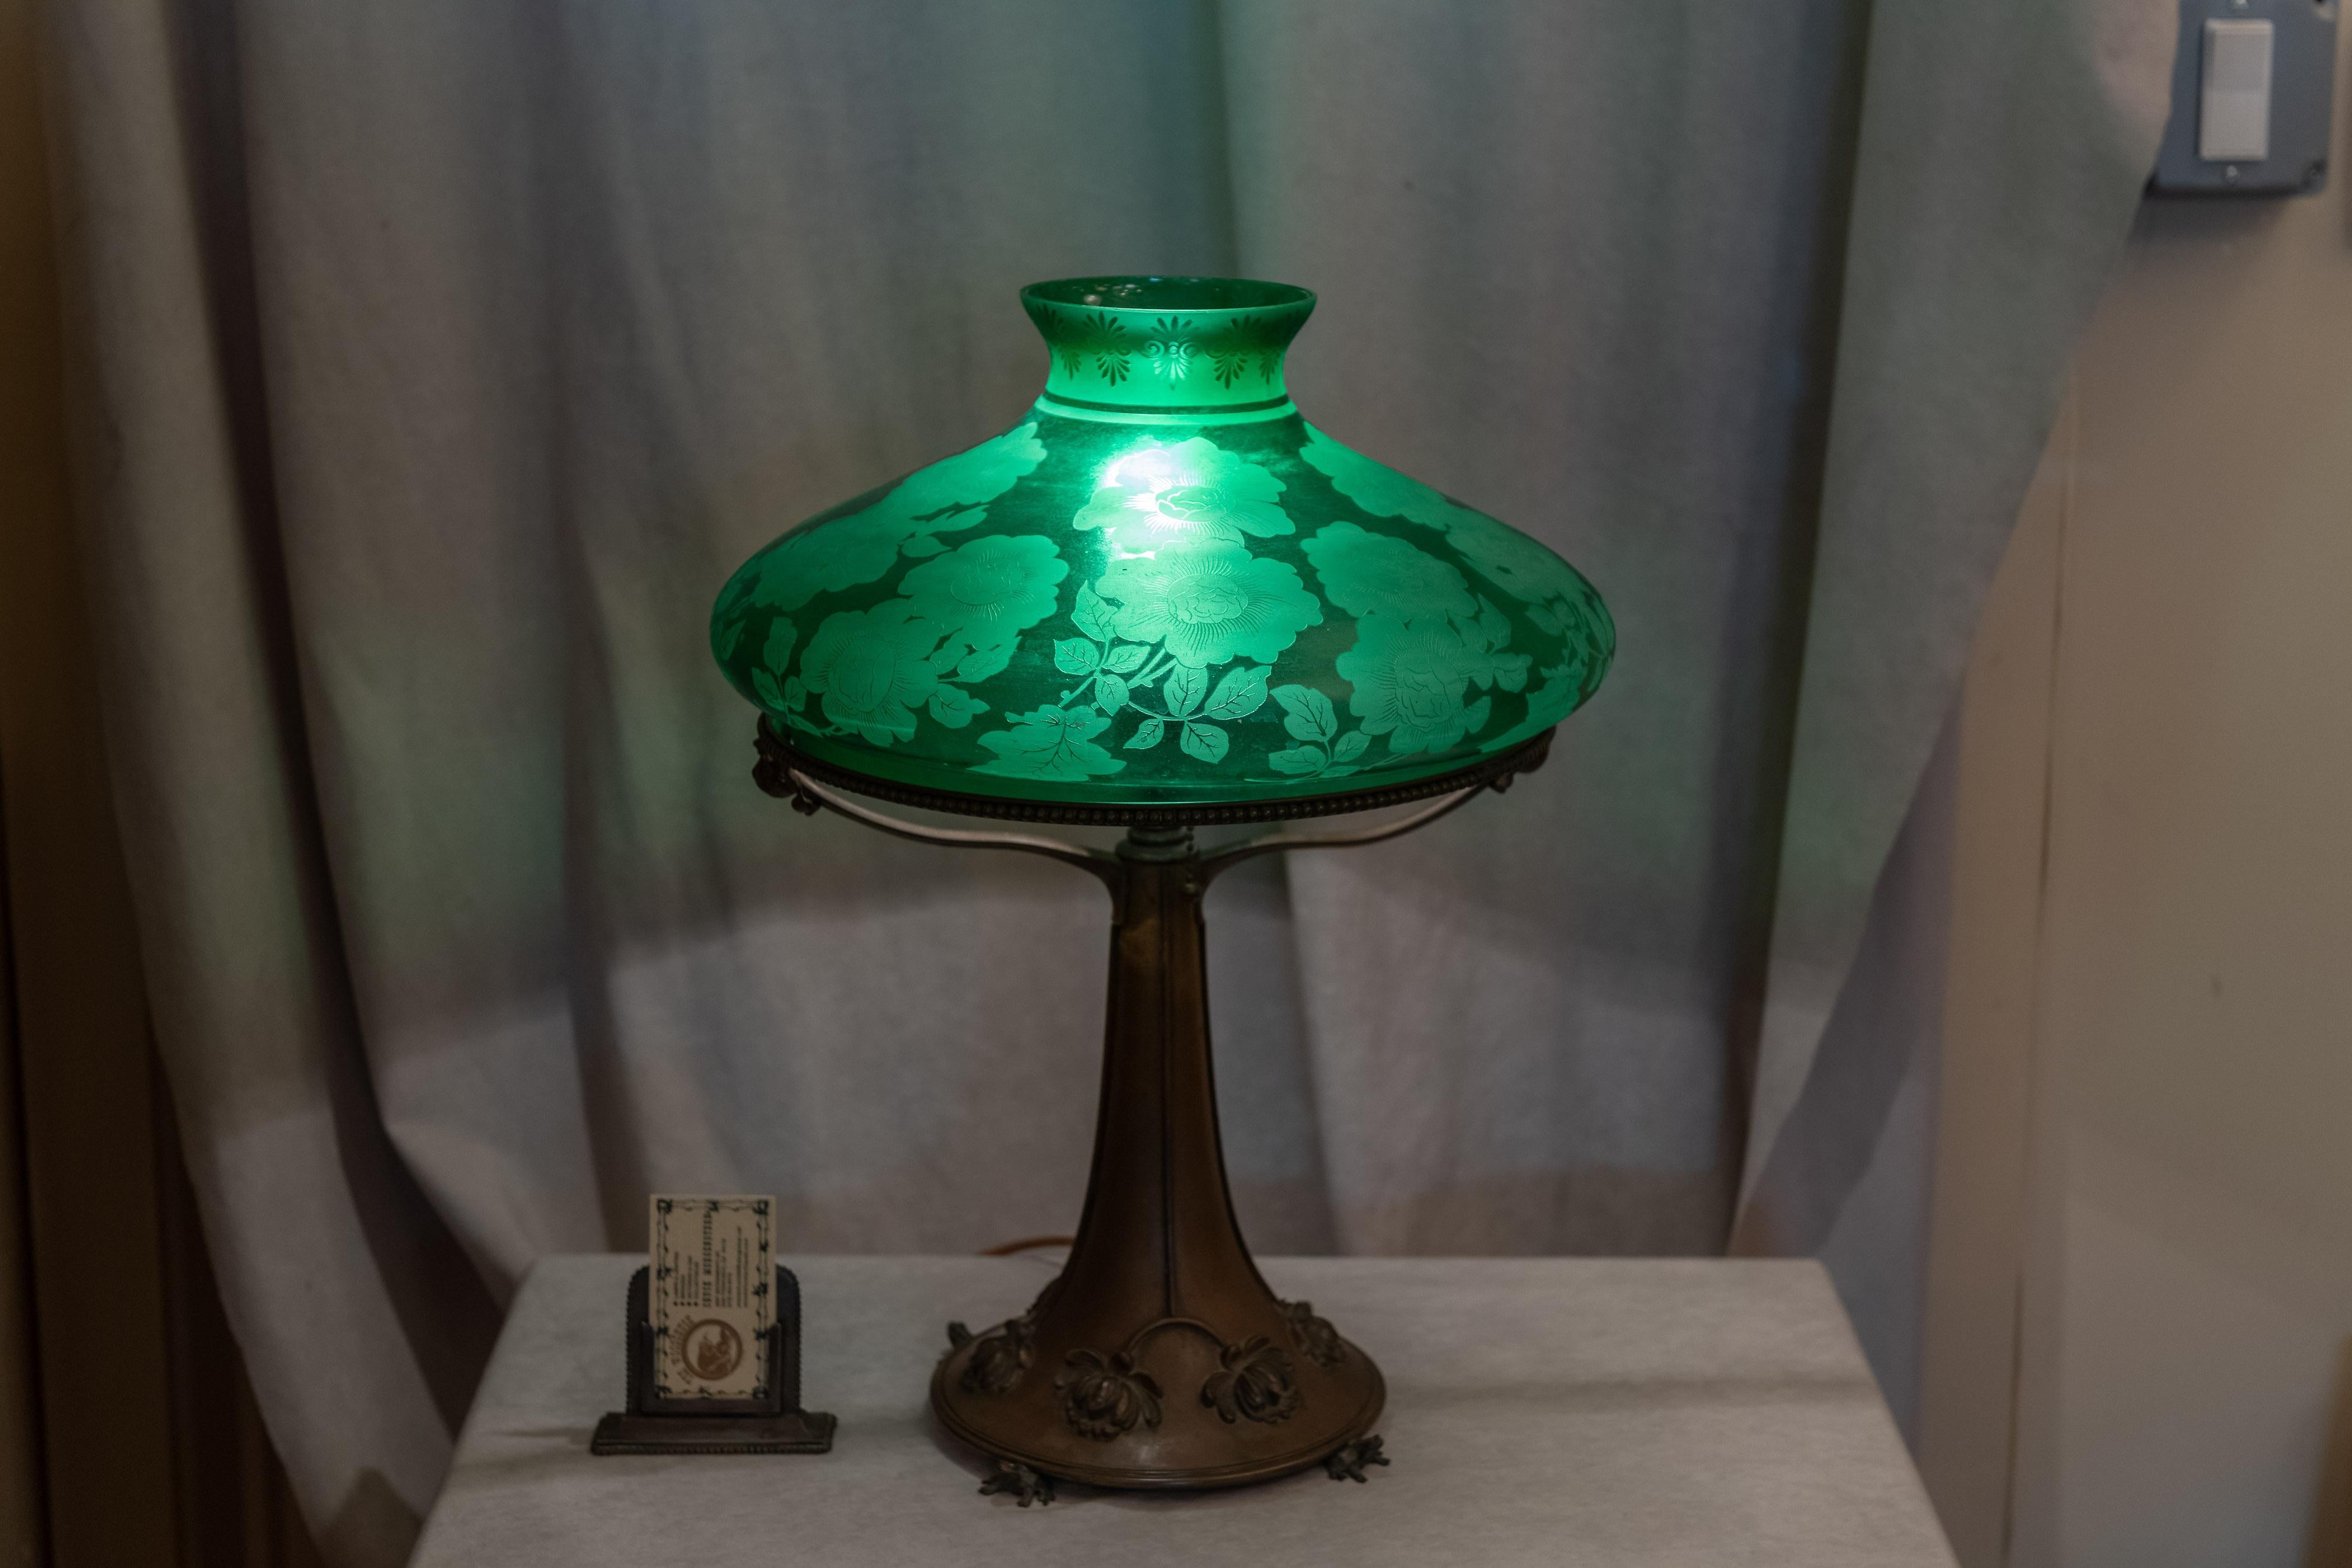 This lamp has a most unusual whimsical base with embossed flowers and 4 adorable frogs holding it up. The ring holding the shade is very strong and has bead work along the rim. The shade is a very high quality piece of glass with deep etched flowers